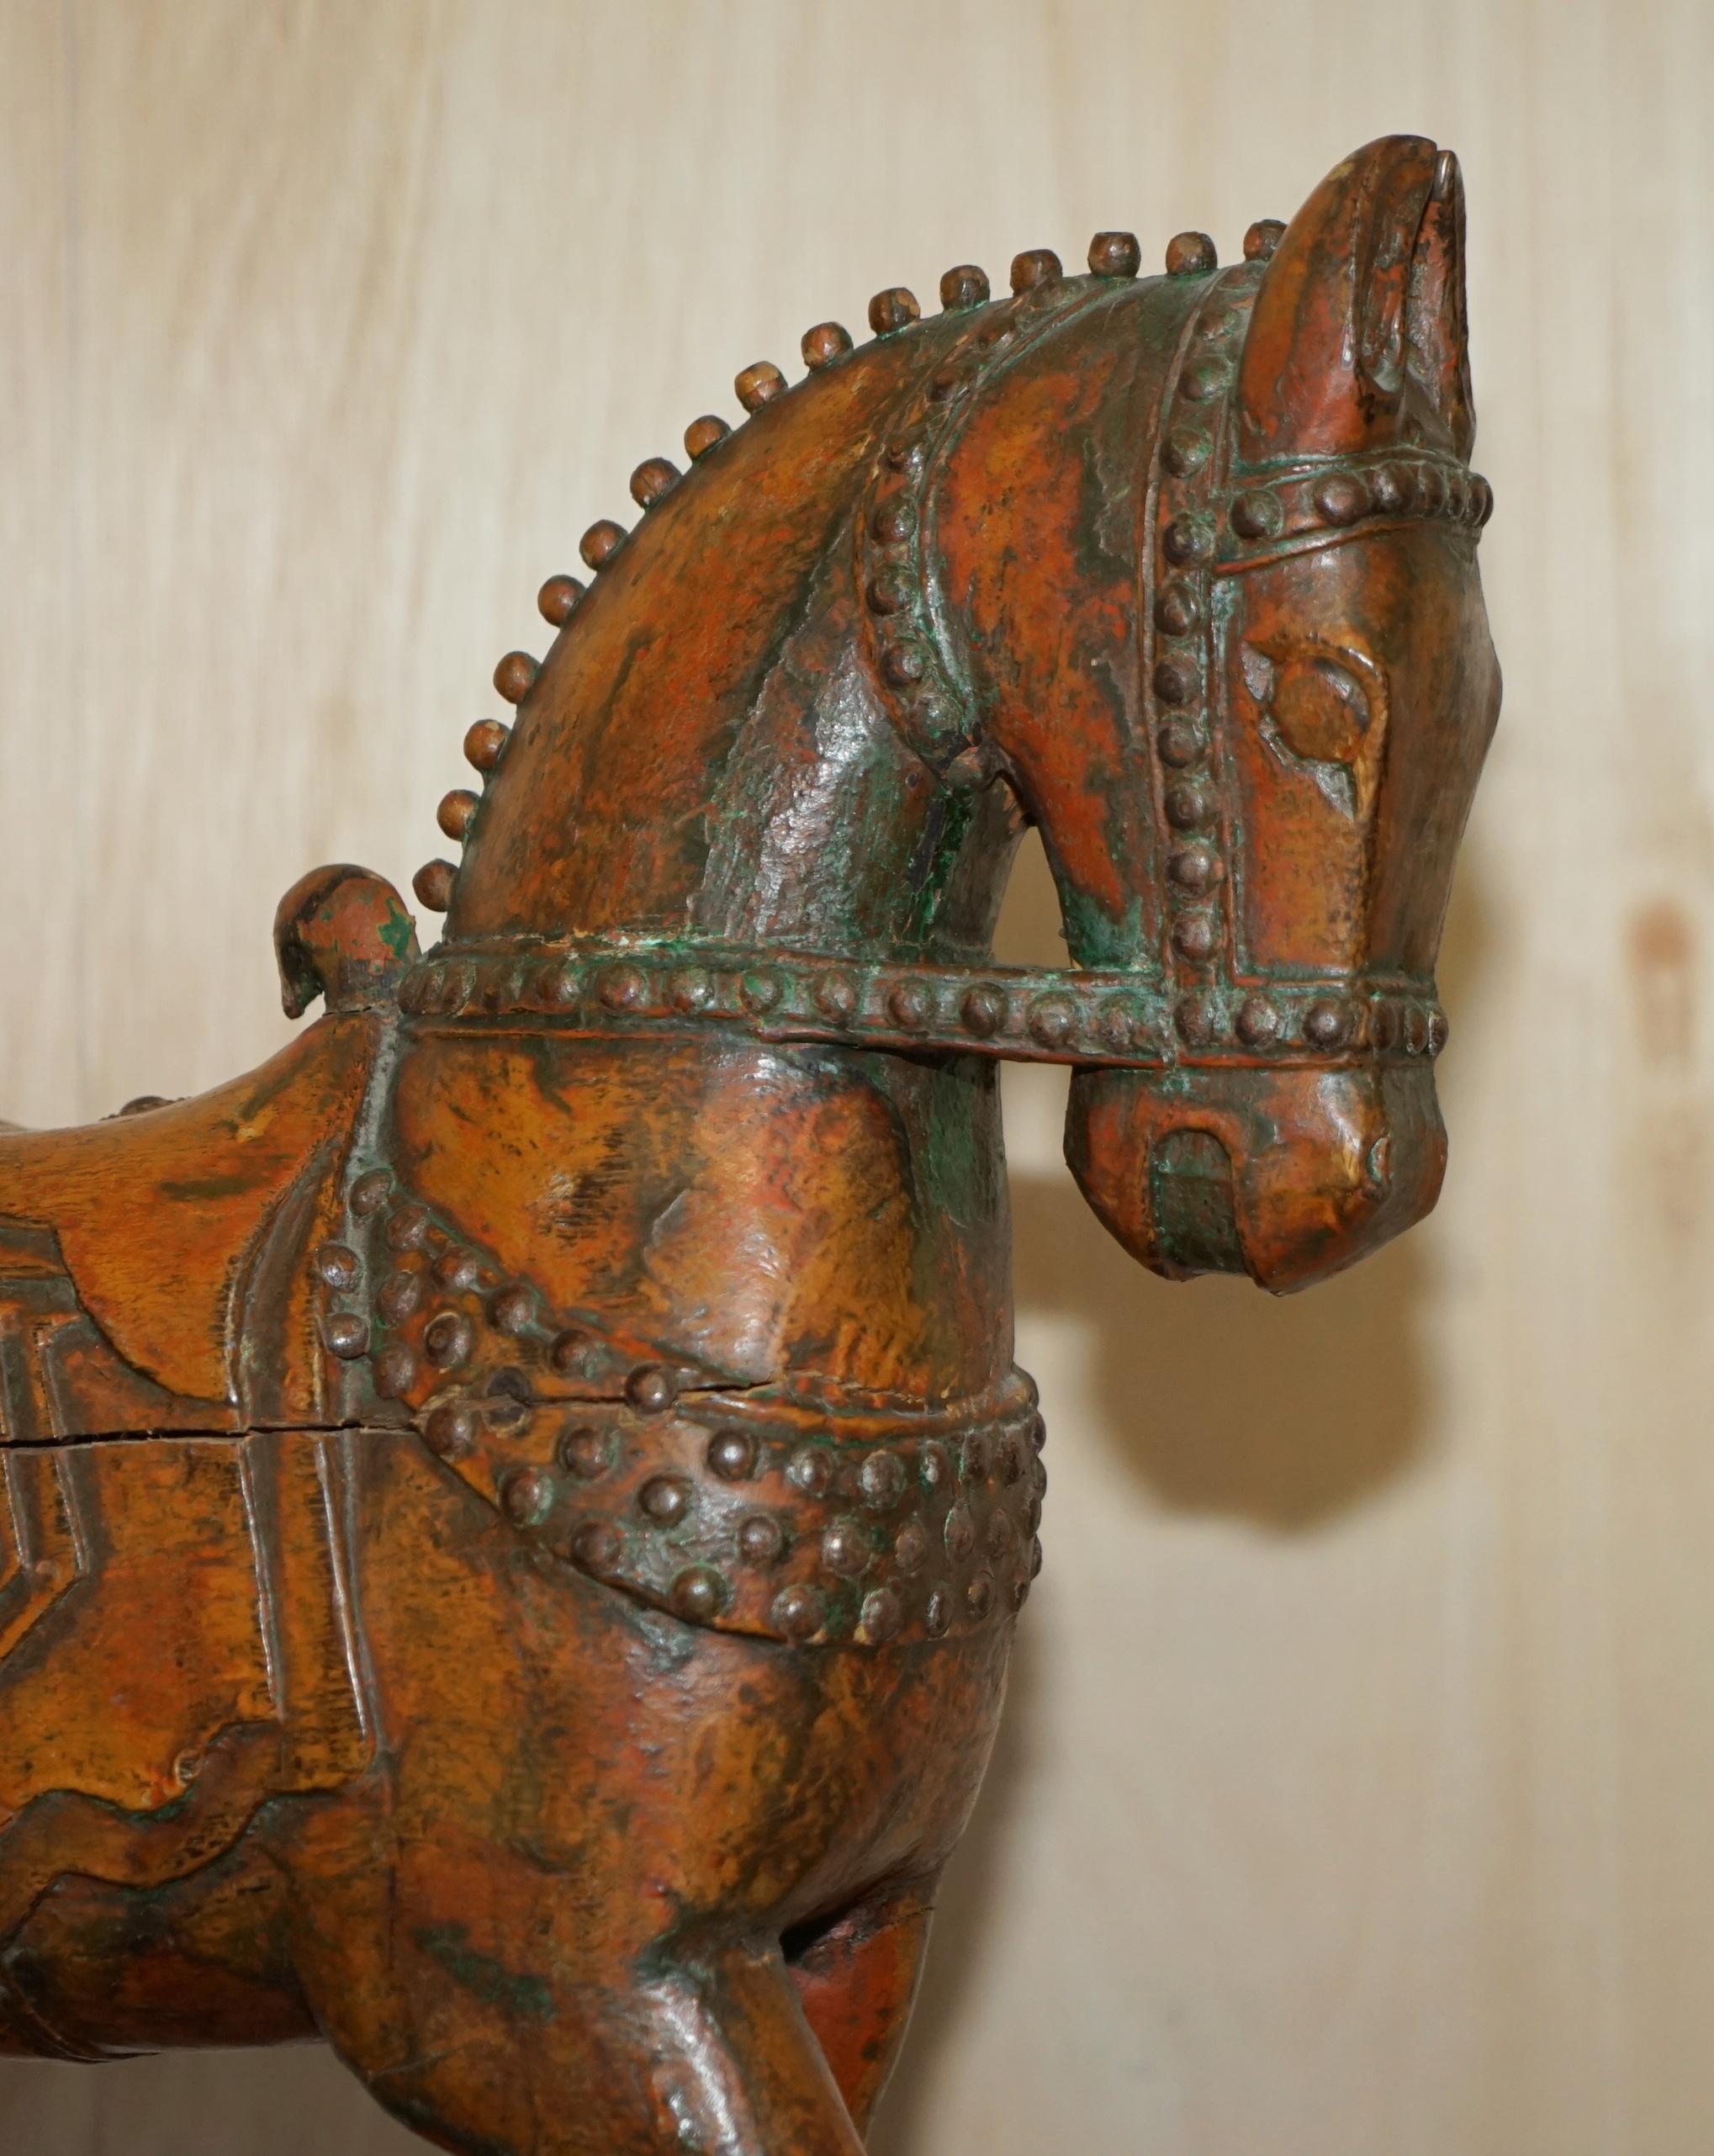 We are delighted to offer for sale this very decorative, hand carved Indian statue of a horse with traces of the original paint 

A good looking well made and decorative piece, it would look amazing in a bay window or on a nice contemporary